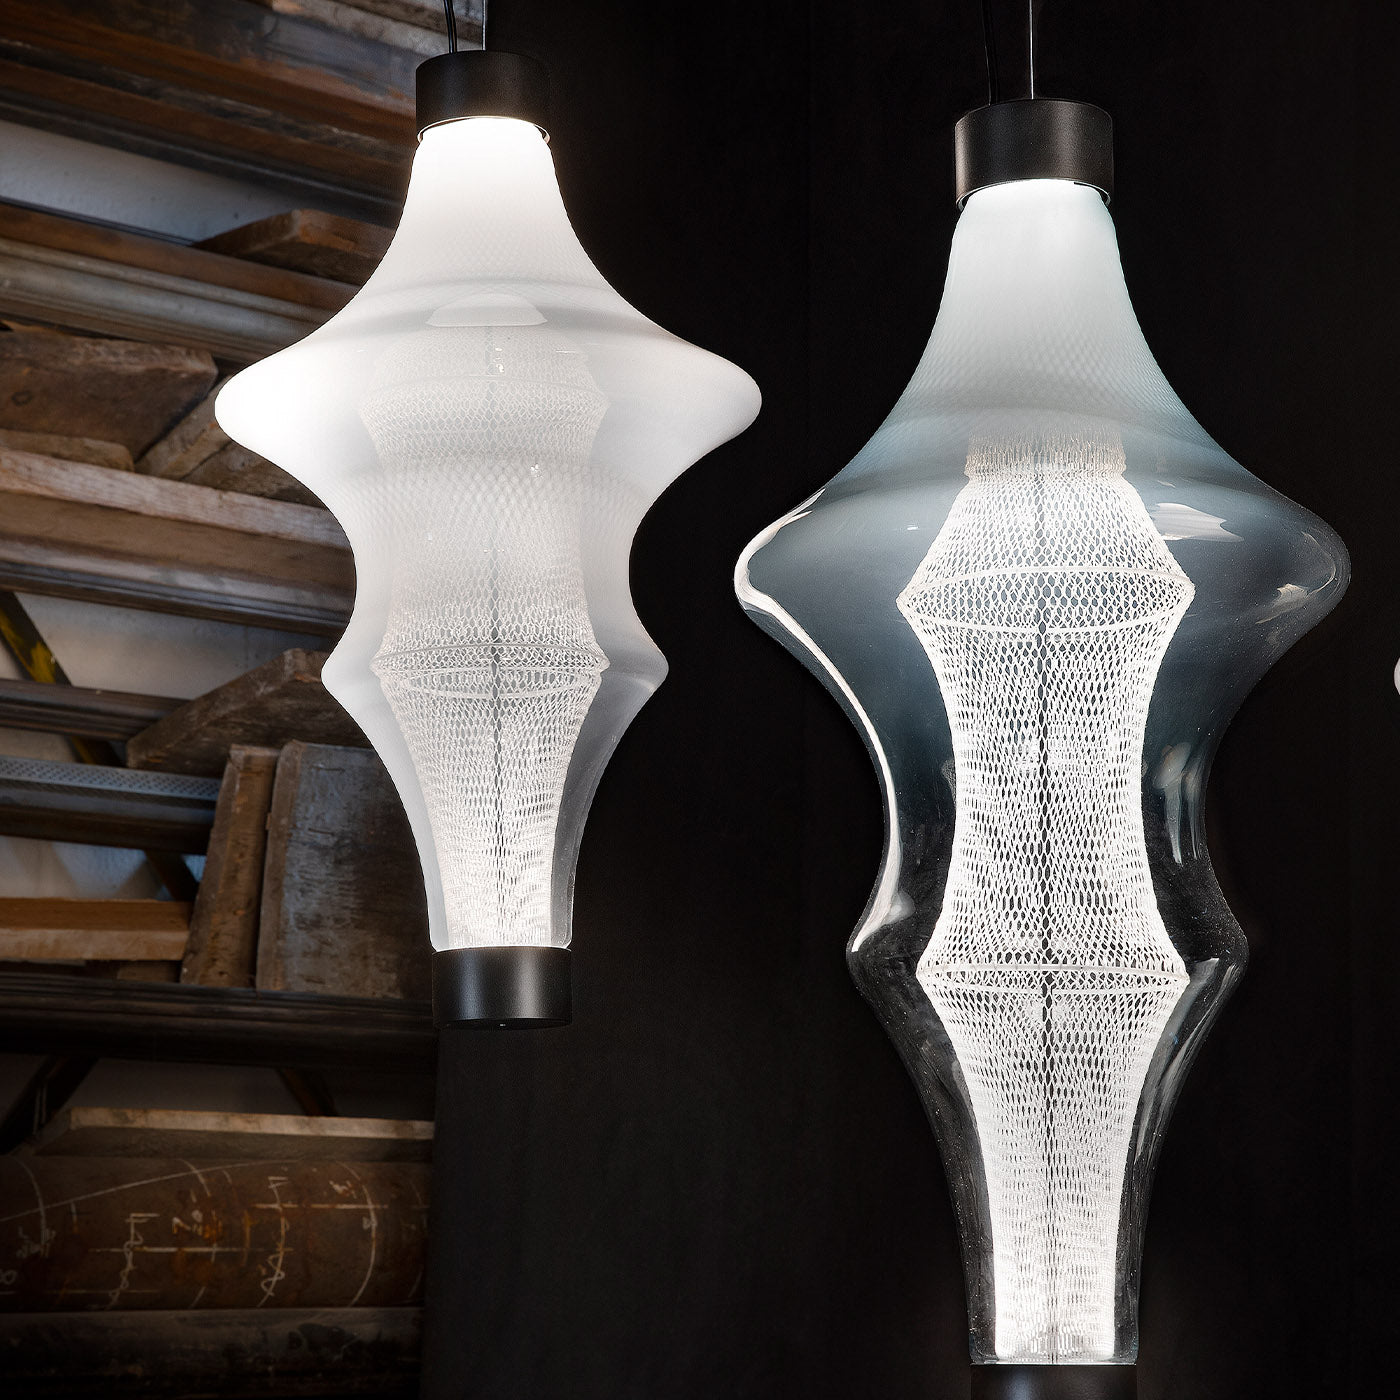 Nasse 01 Pendant Lamp by Marco Zito - Alternative view 3